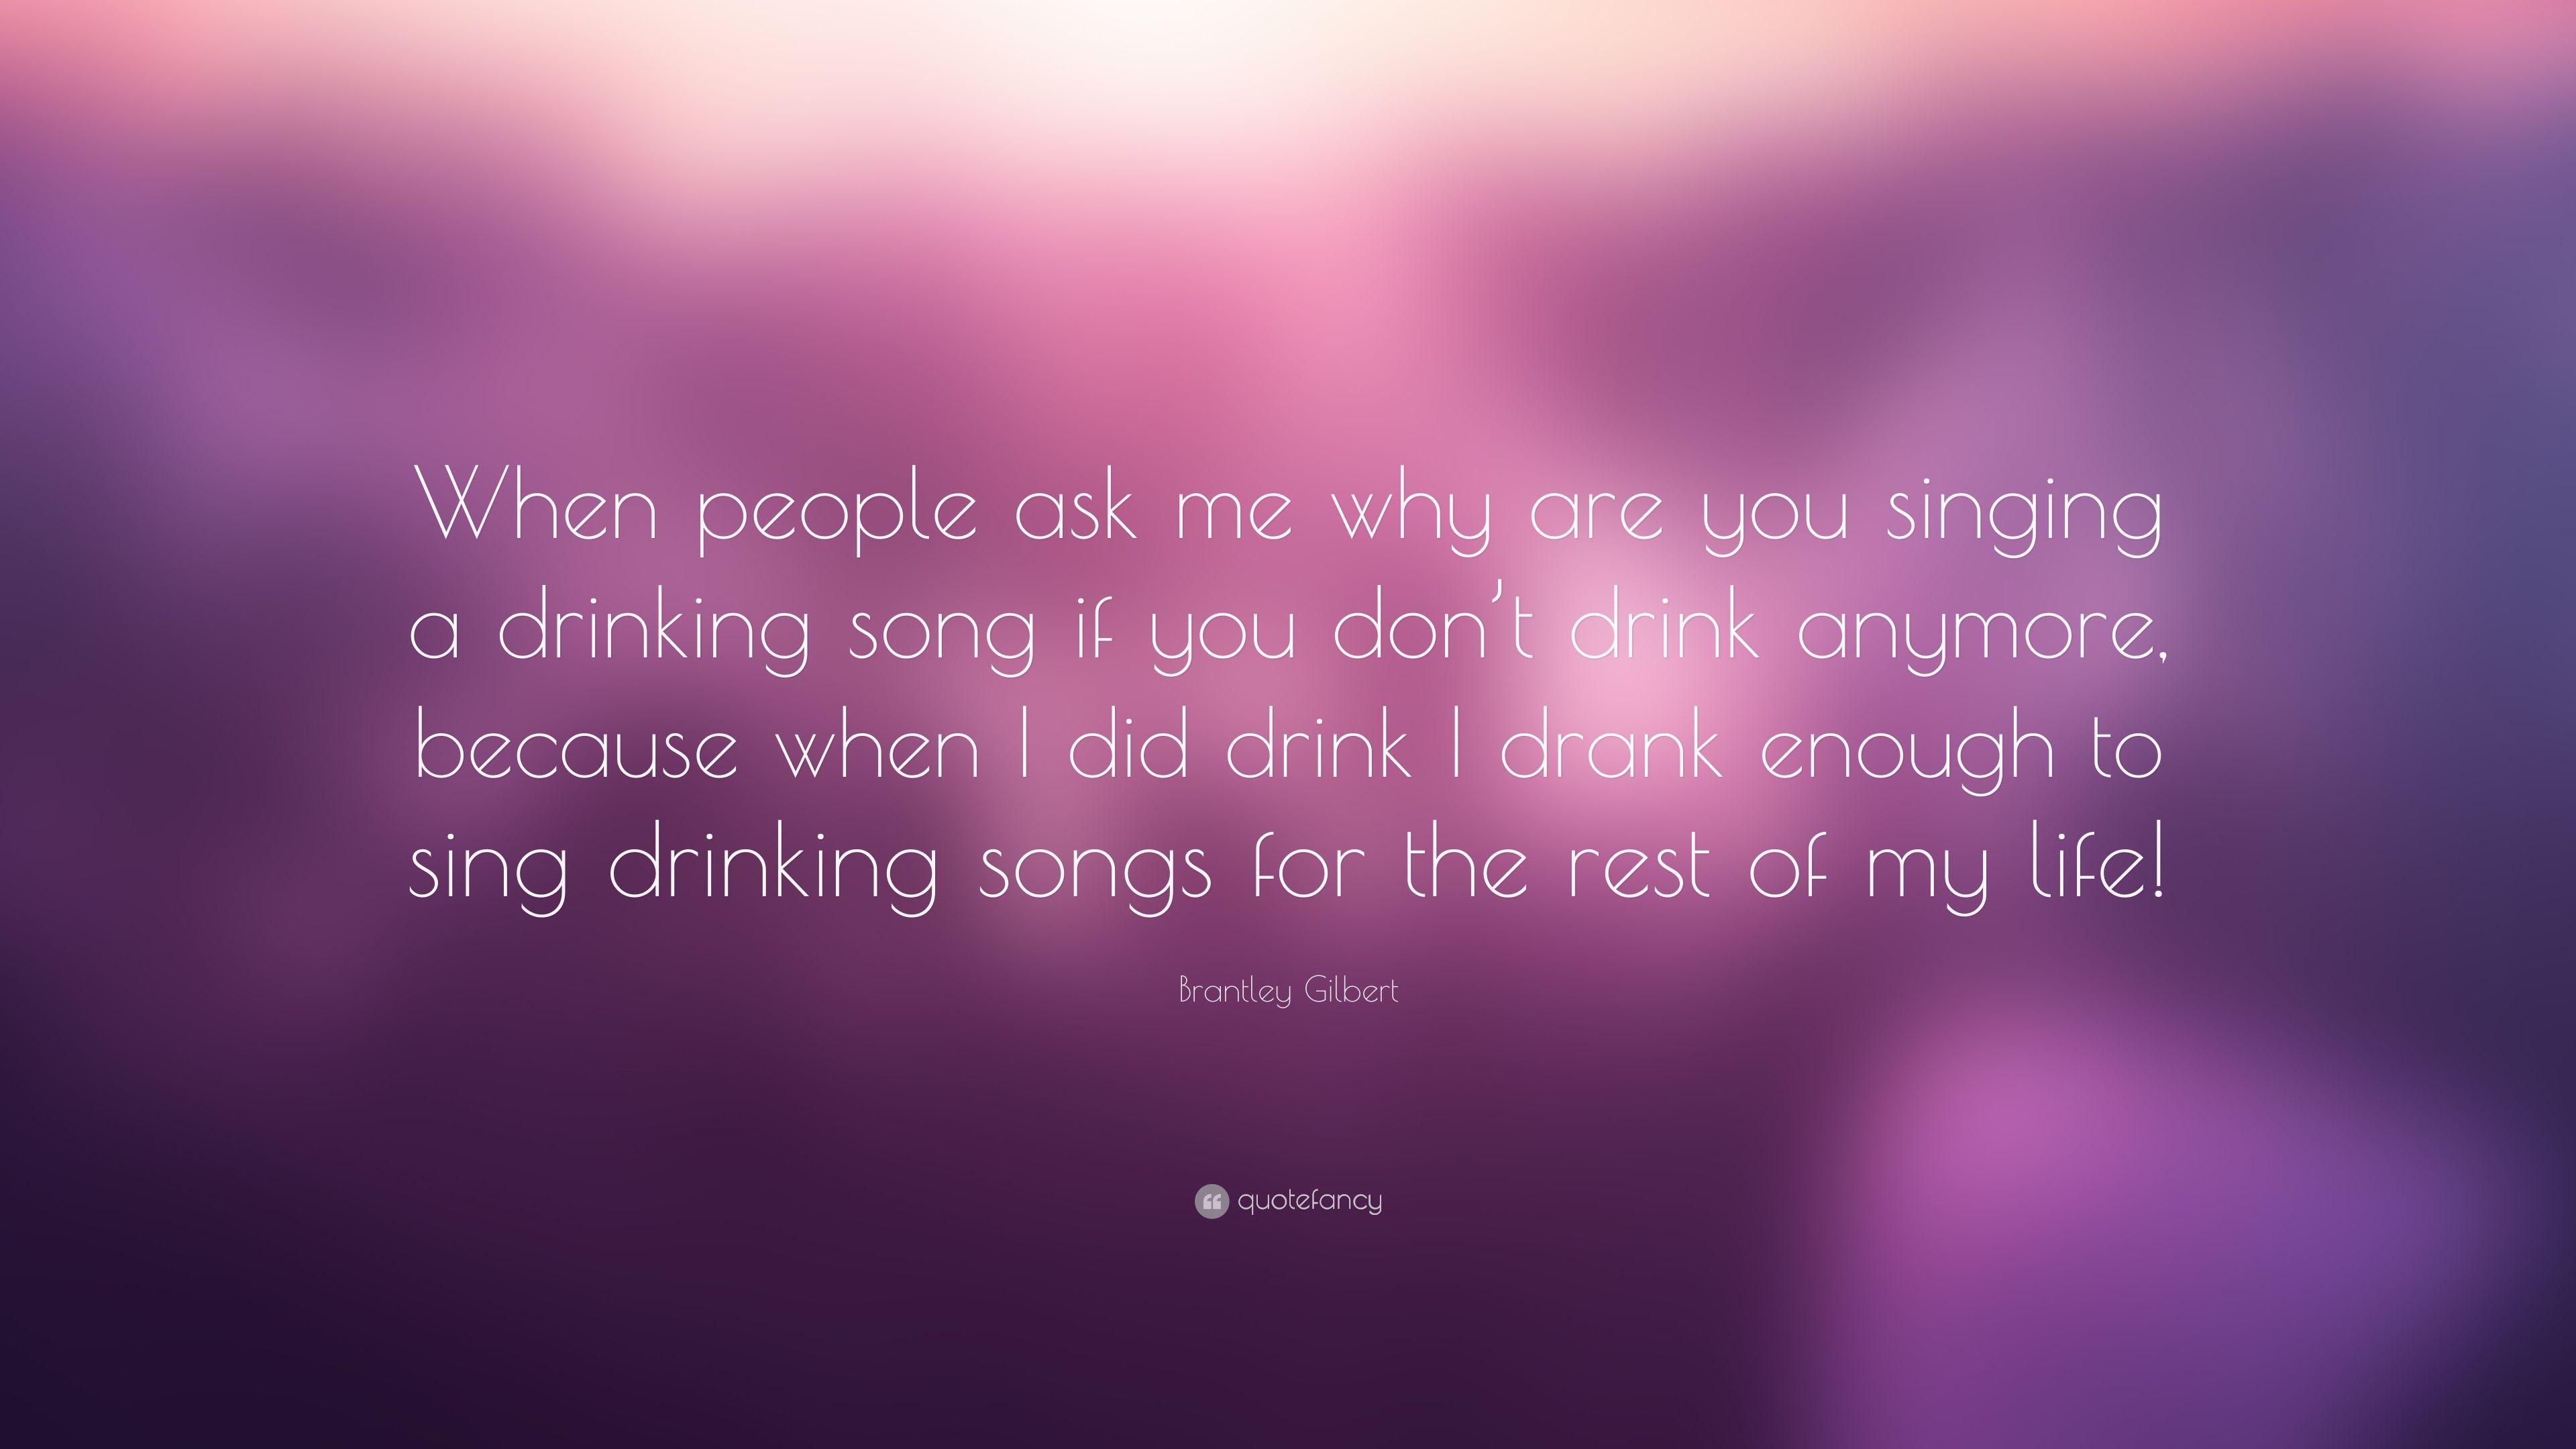 Brantley Gilbert Quote: “When people ask me why are you singing a